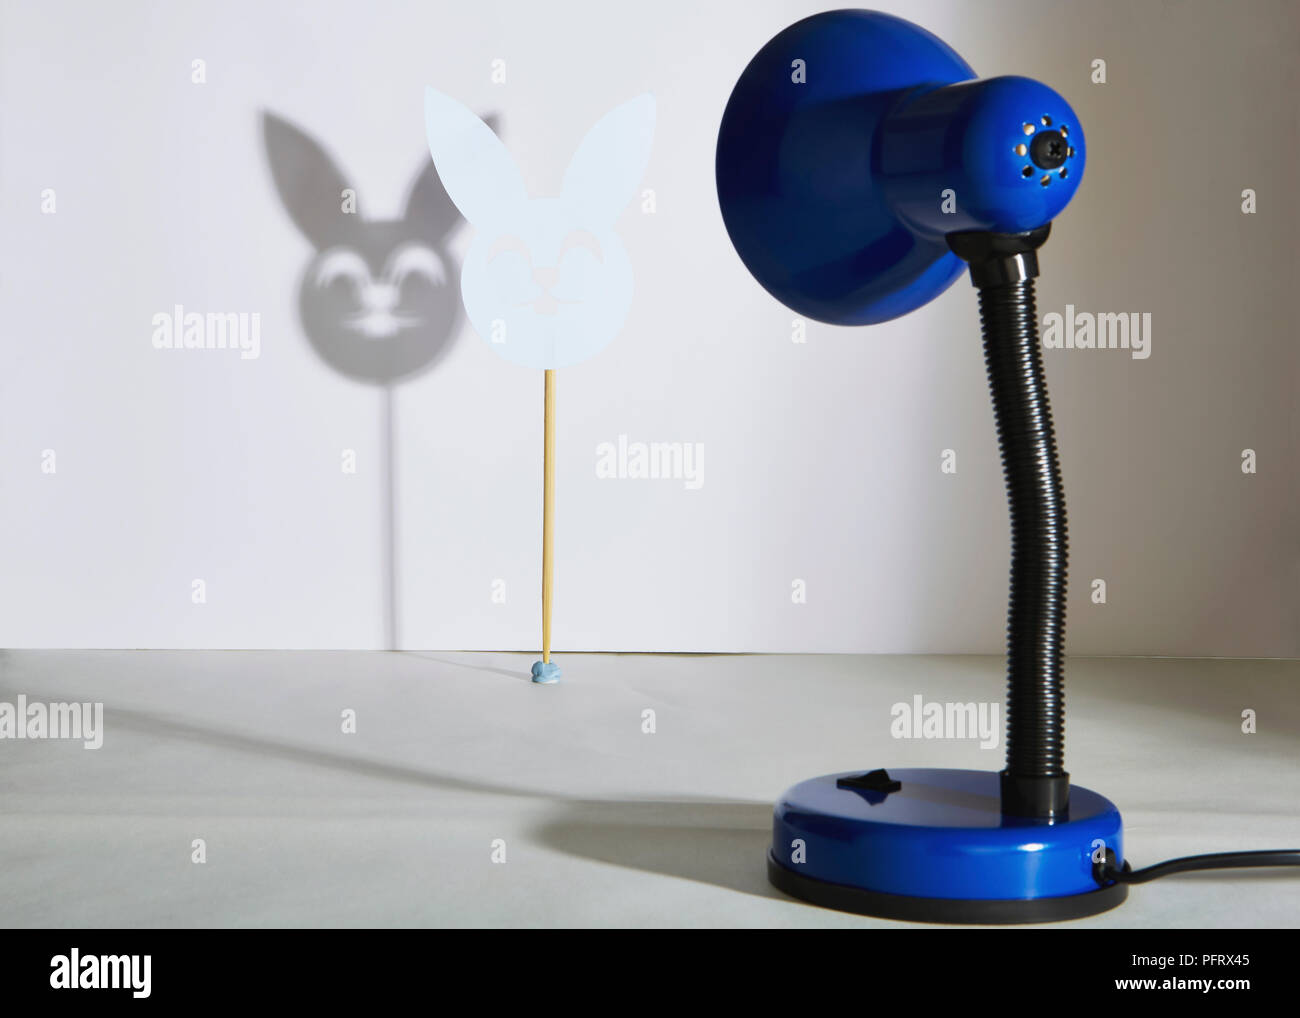 Blue table lamp casting a shadow of a rabit mask Stock Photo